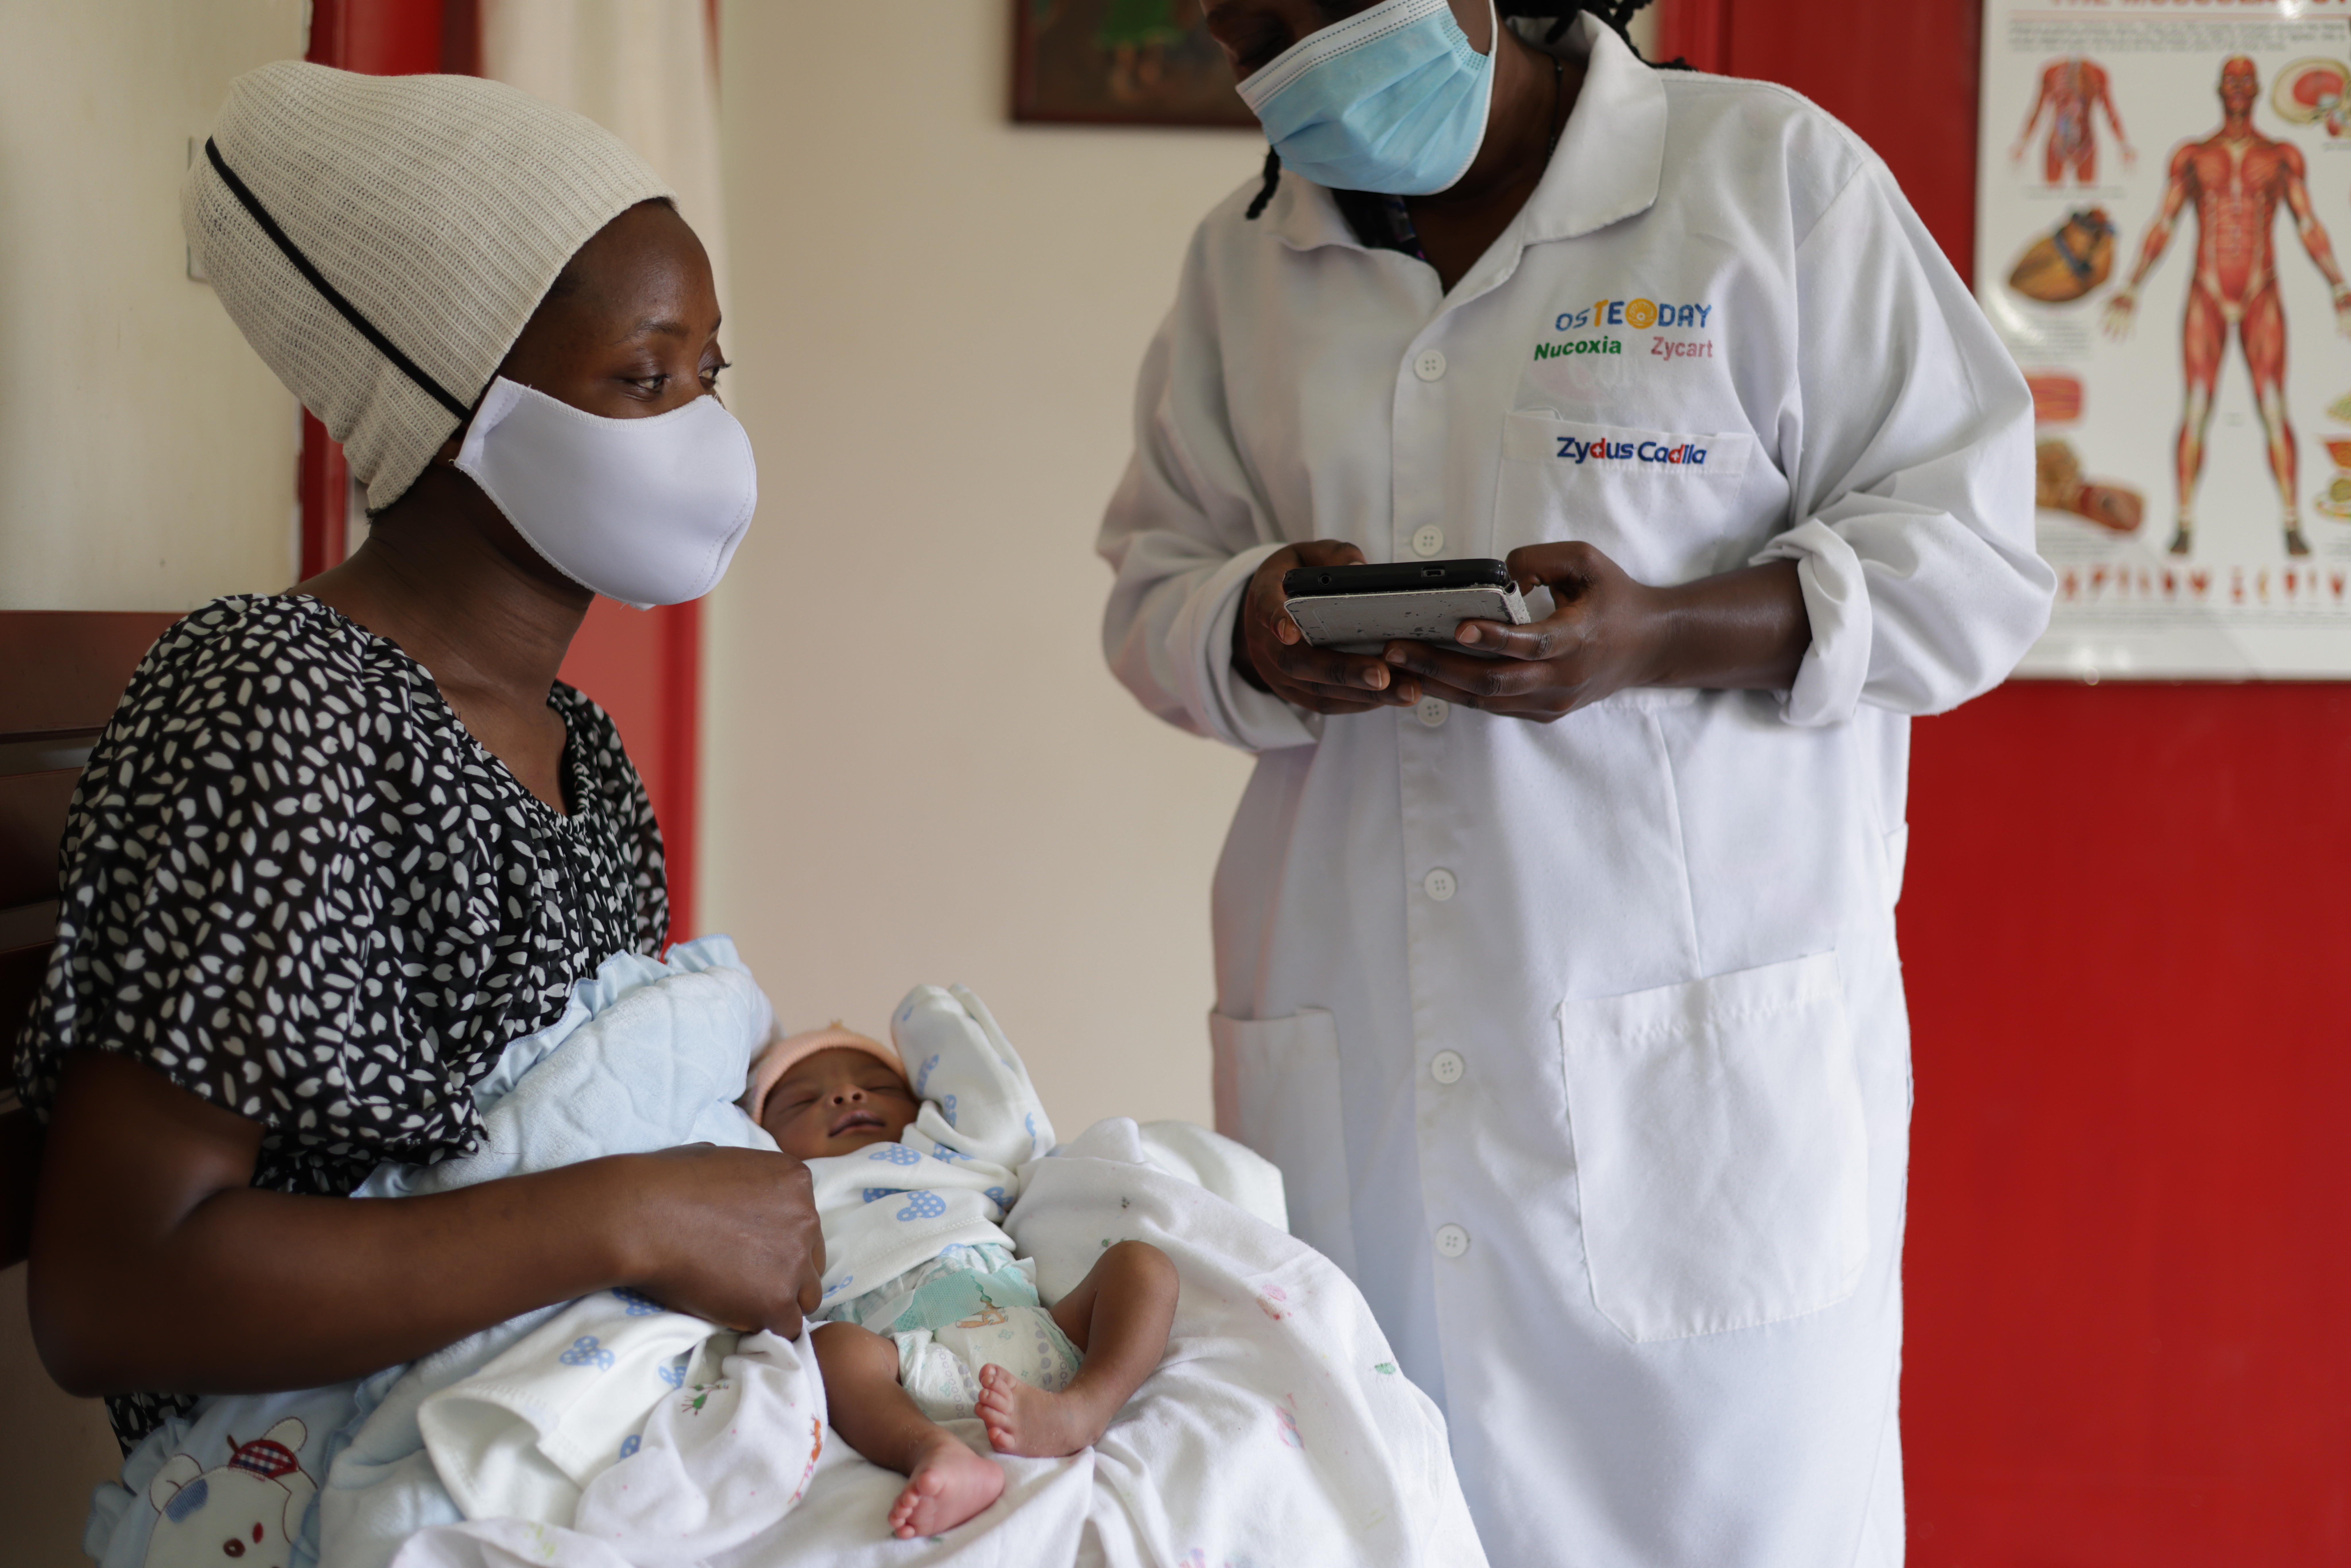 A woman wearing mask holding a newborn baby with clubfoot condition. A healthcare professional is standing next to her speaking.